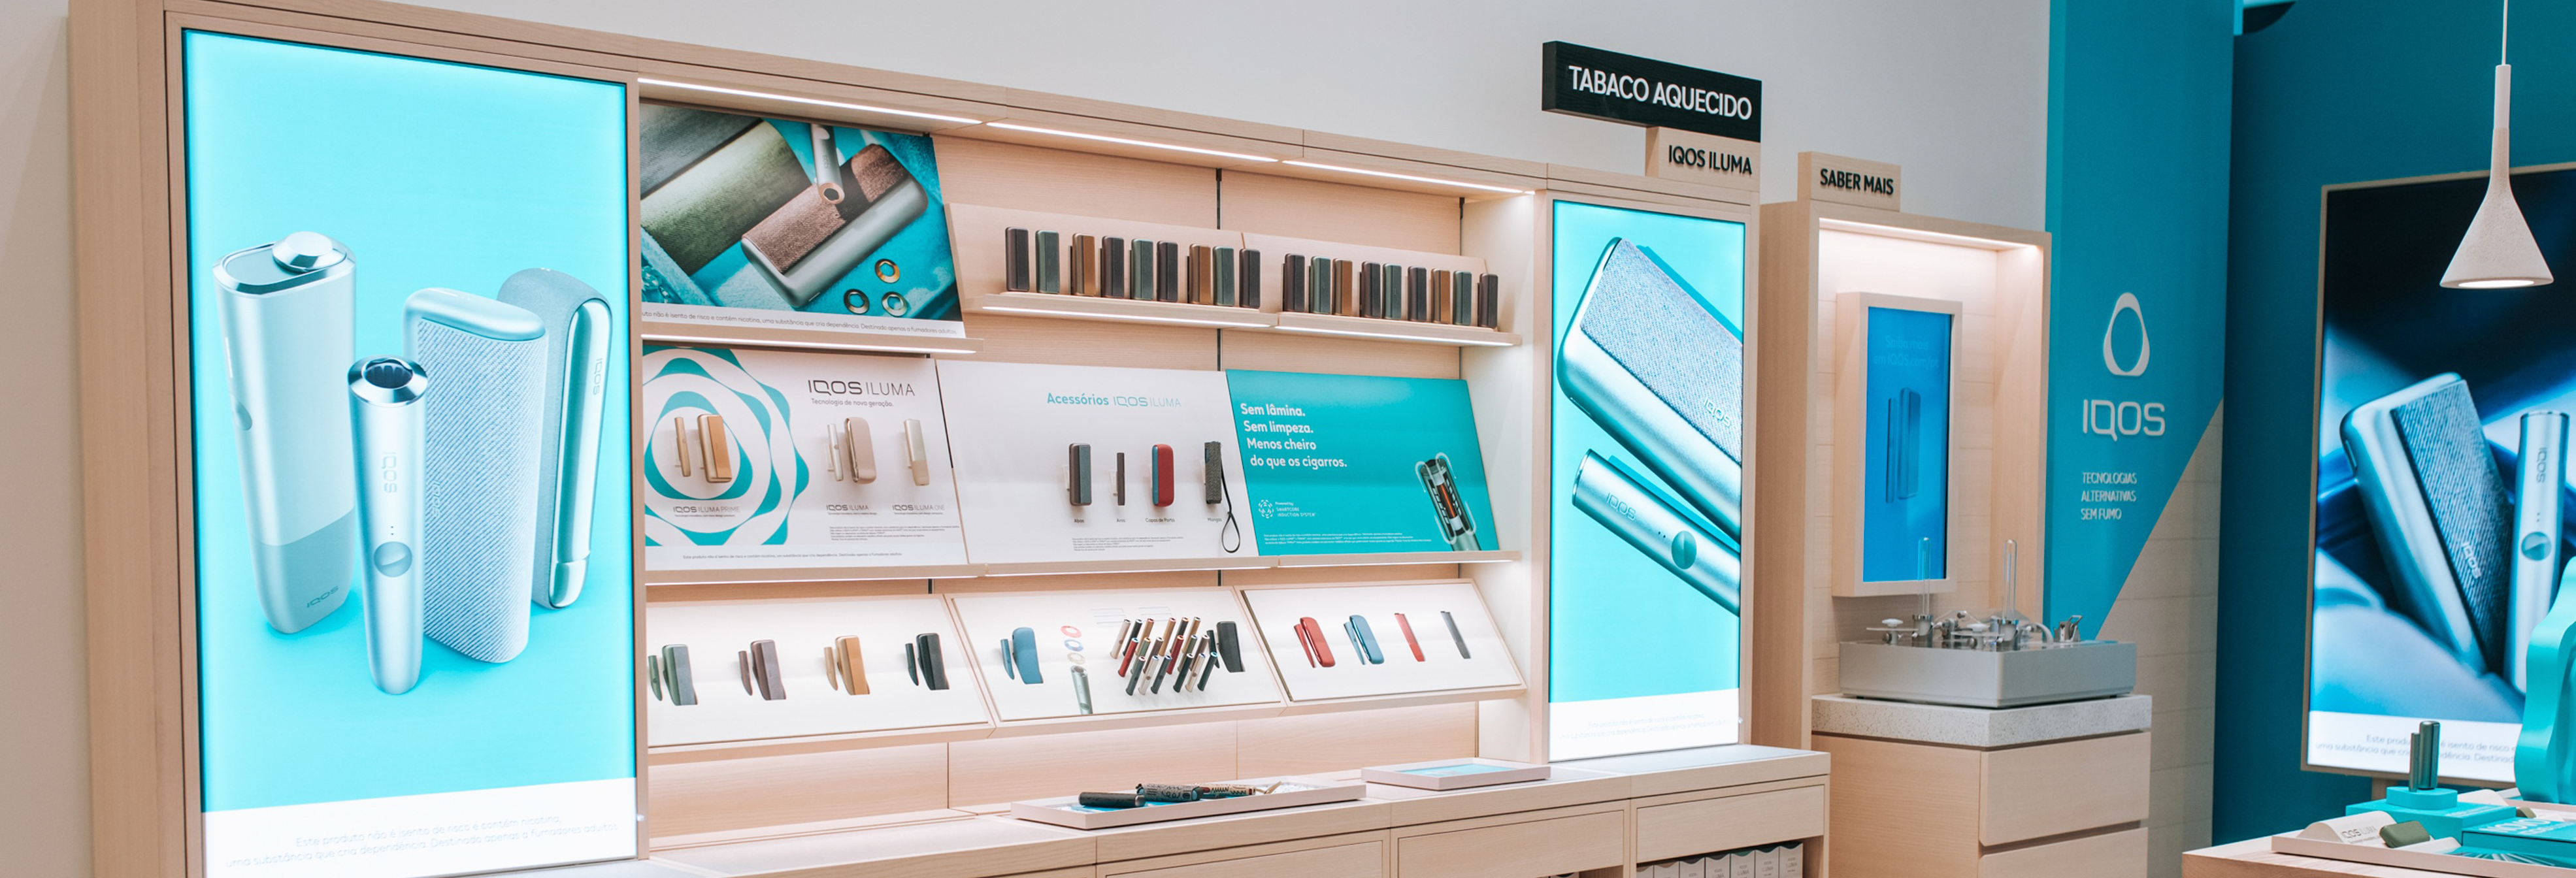 IQOS stores are open again